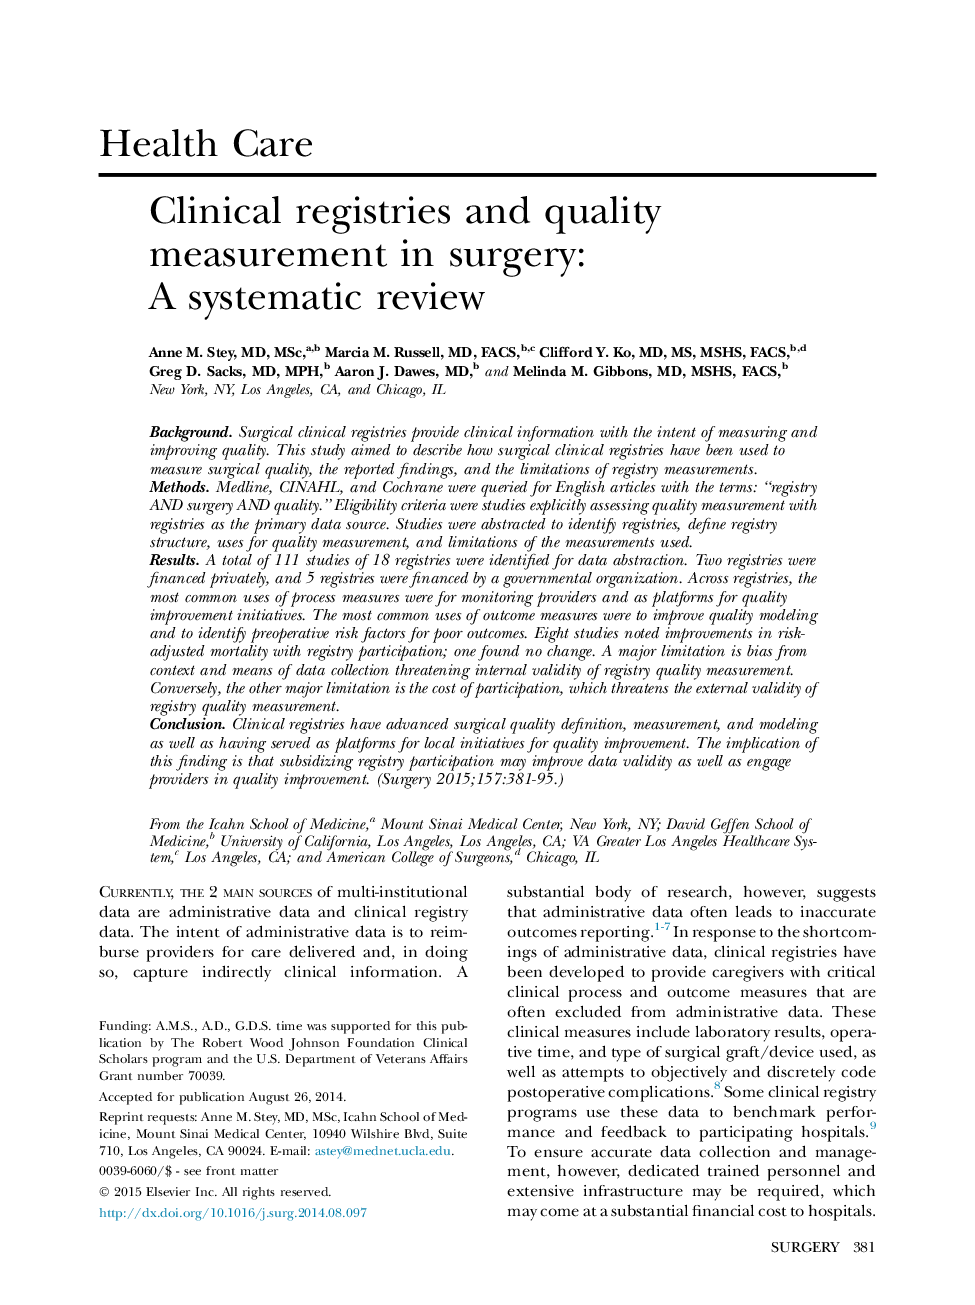 Health CareClinical registries and quality measurement in surgery: AÂ systematicÂ review